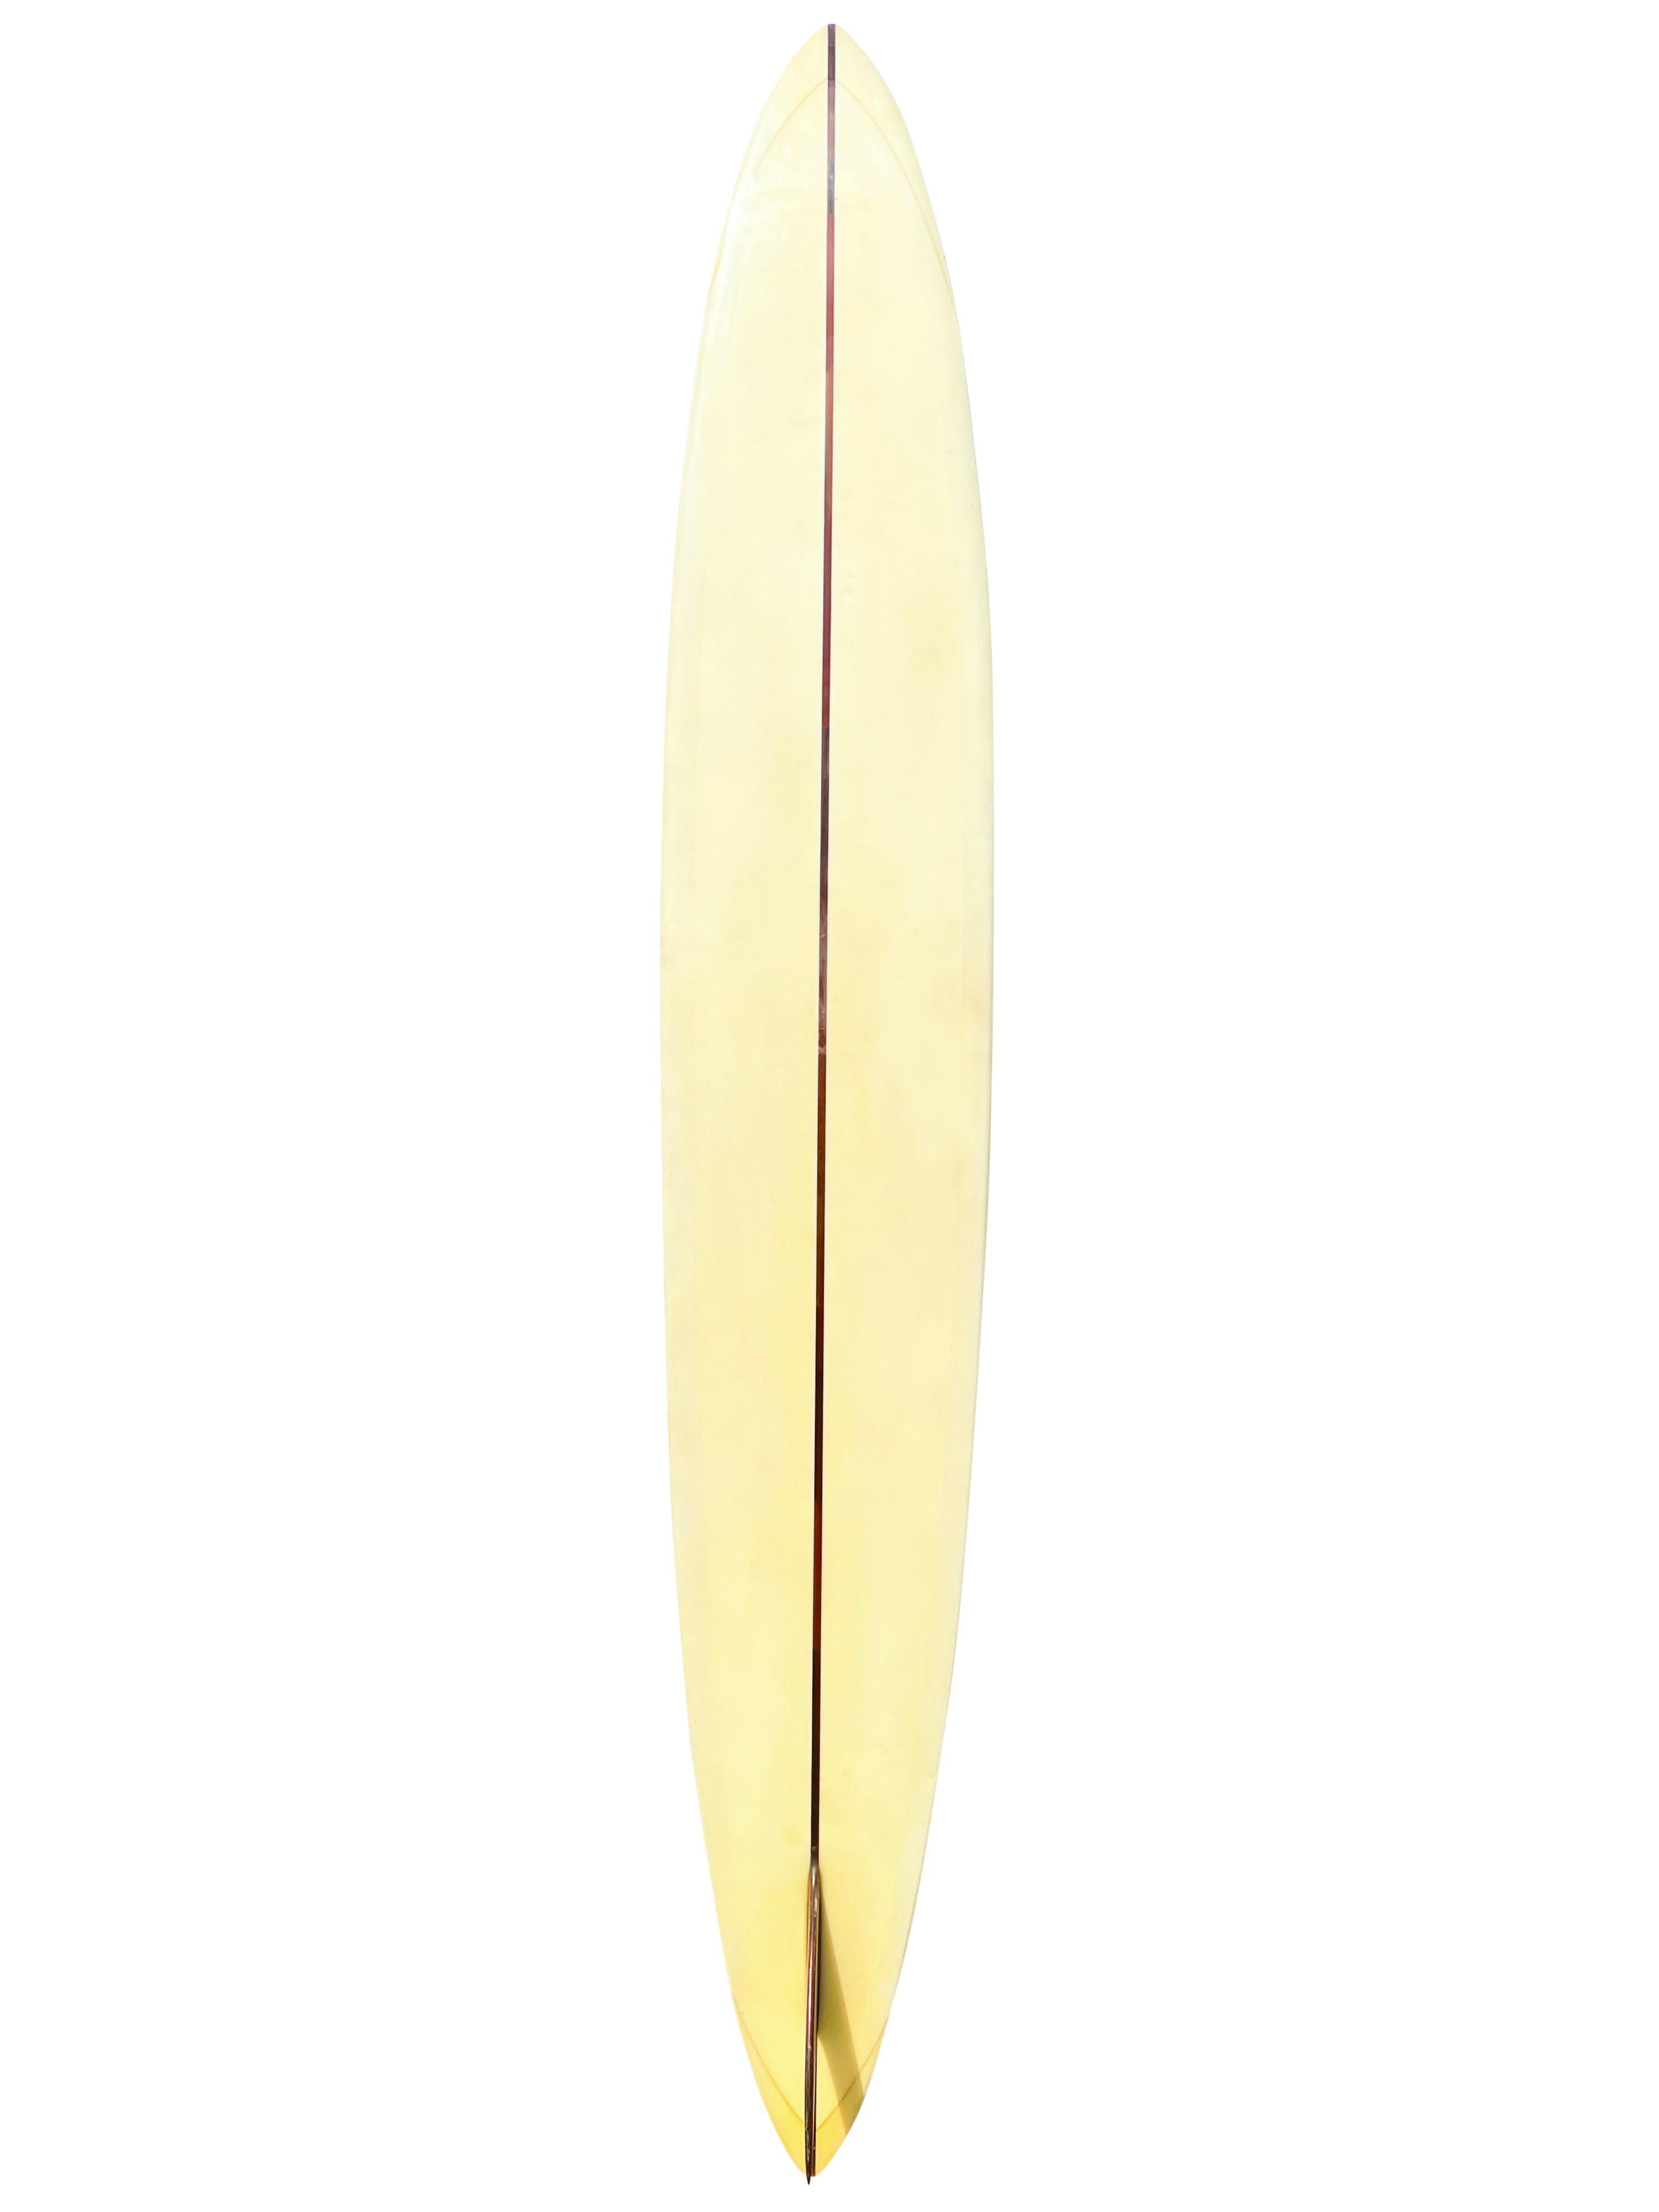 1960s Model Pat Curren big wave ‘Elephant Gun’ surfboard. Features an iconic late 1960s big wave design made for riding giants. Pintail shape with custom foam blank with old growth redwood single fin, redwood stringer, and extra strength Volan